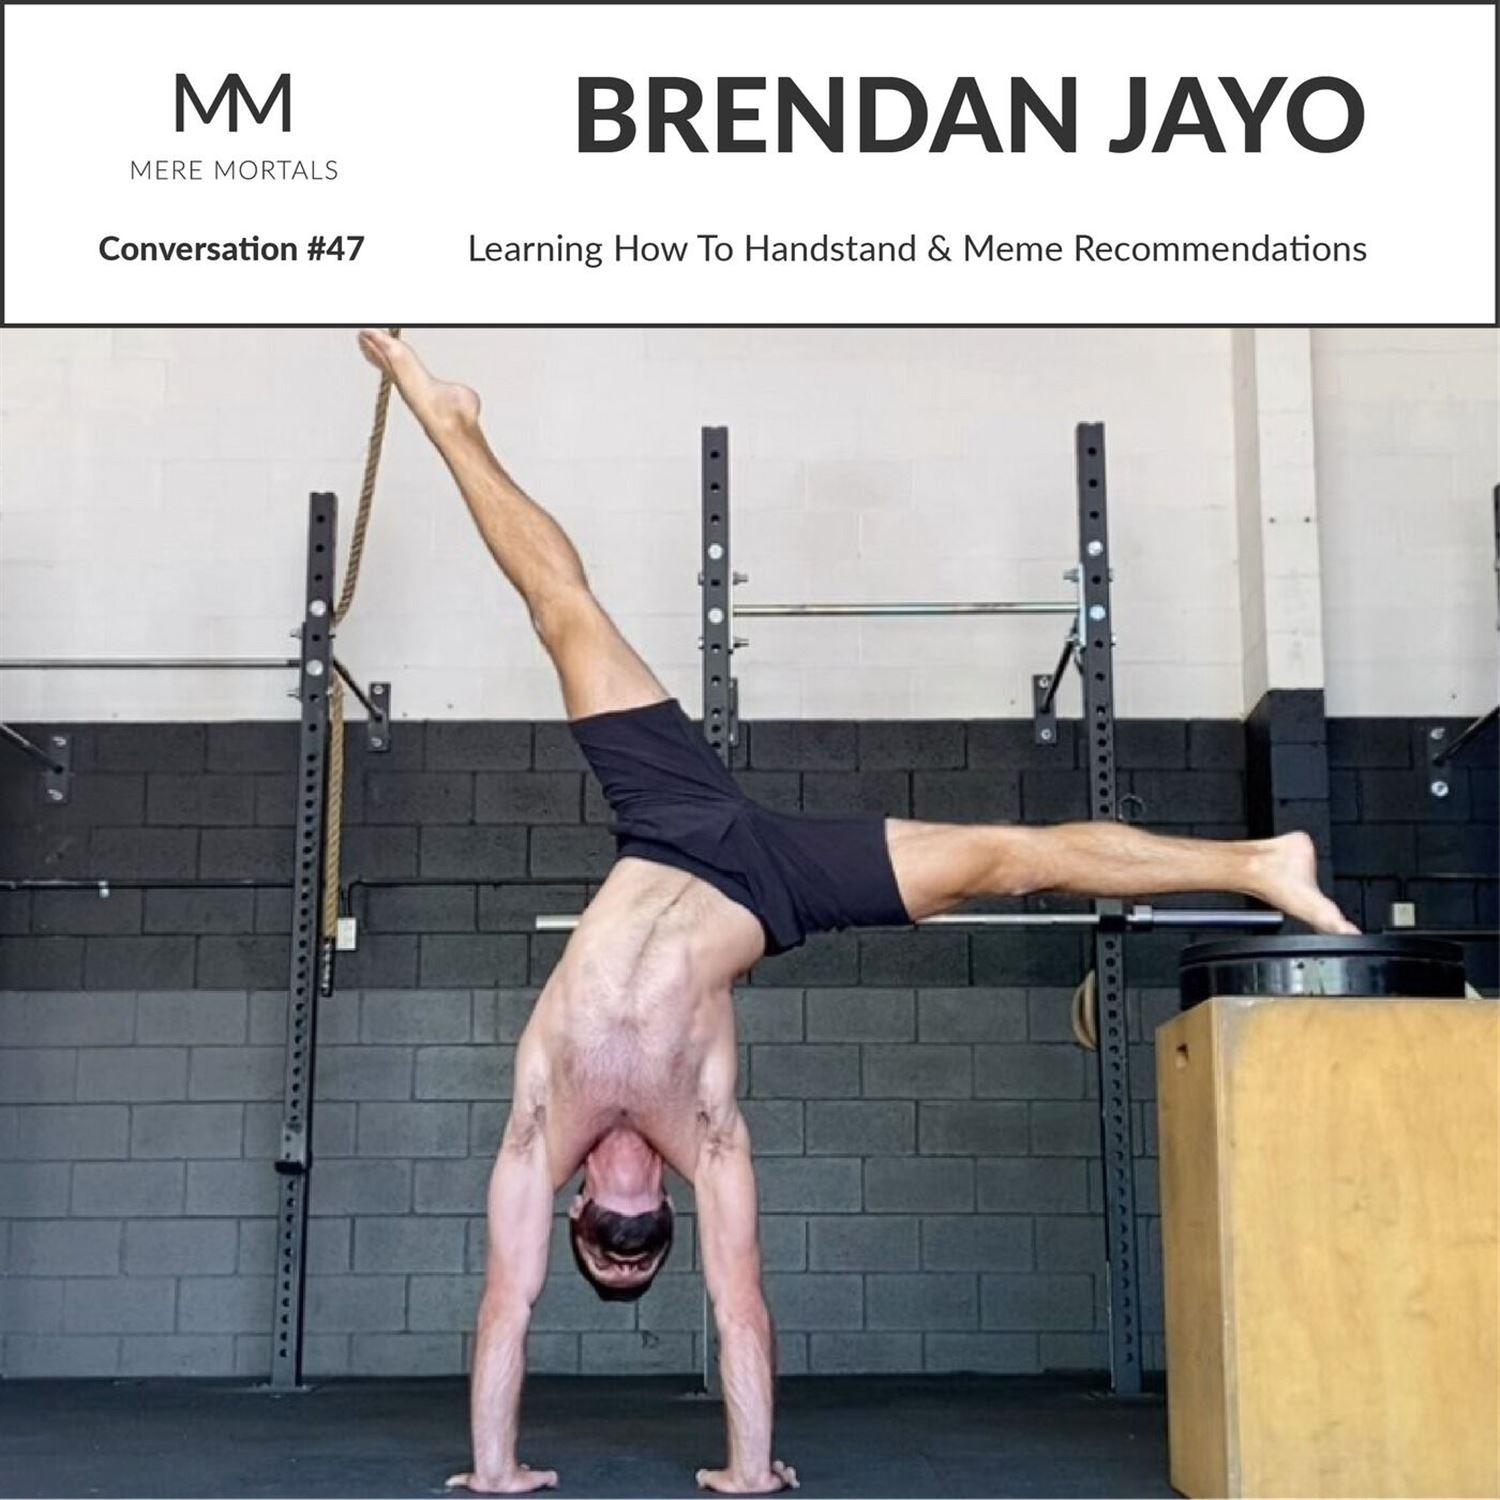 BRENDAN JAYO | Learning How To Handstand & Meme Recommendations